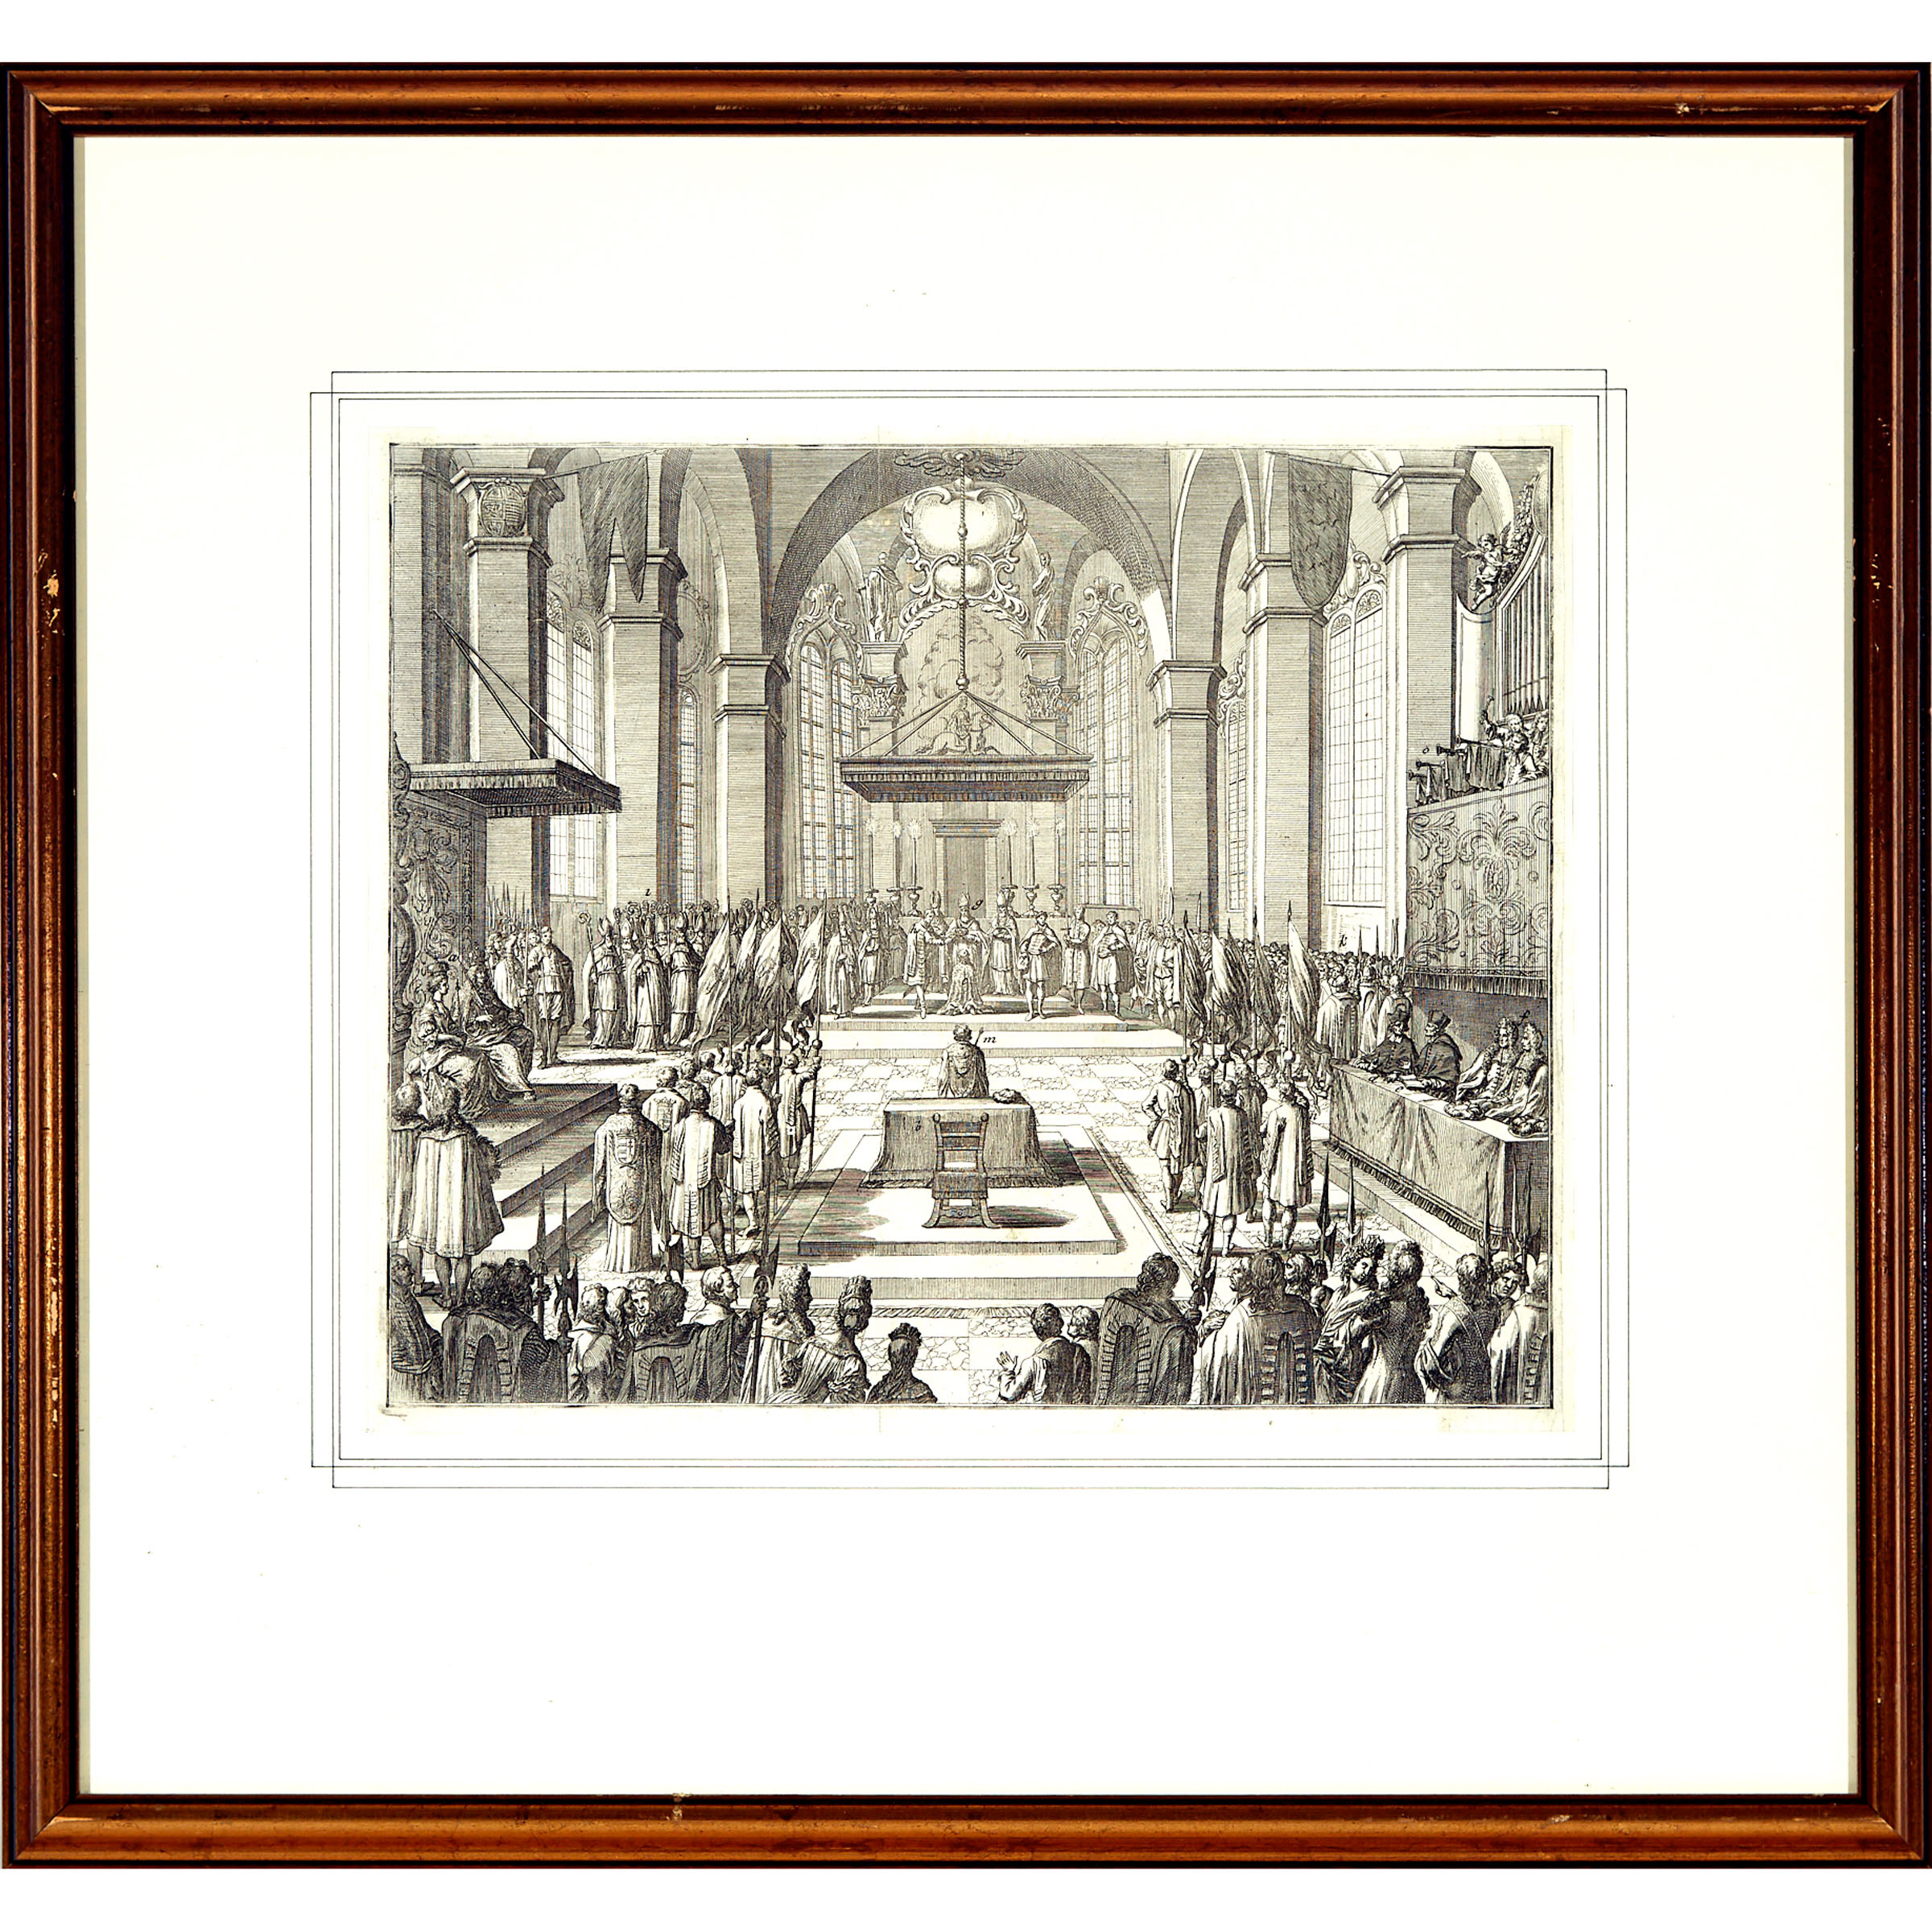 French Engraving of Church interior, 18th century